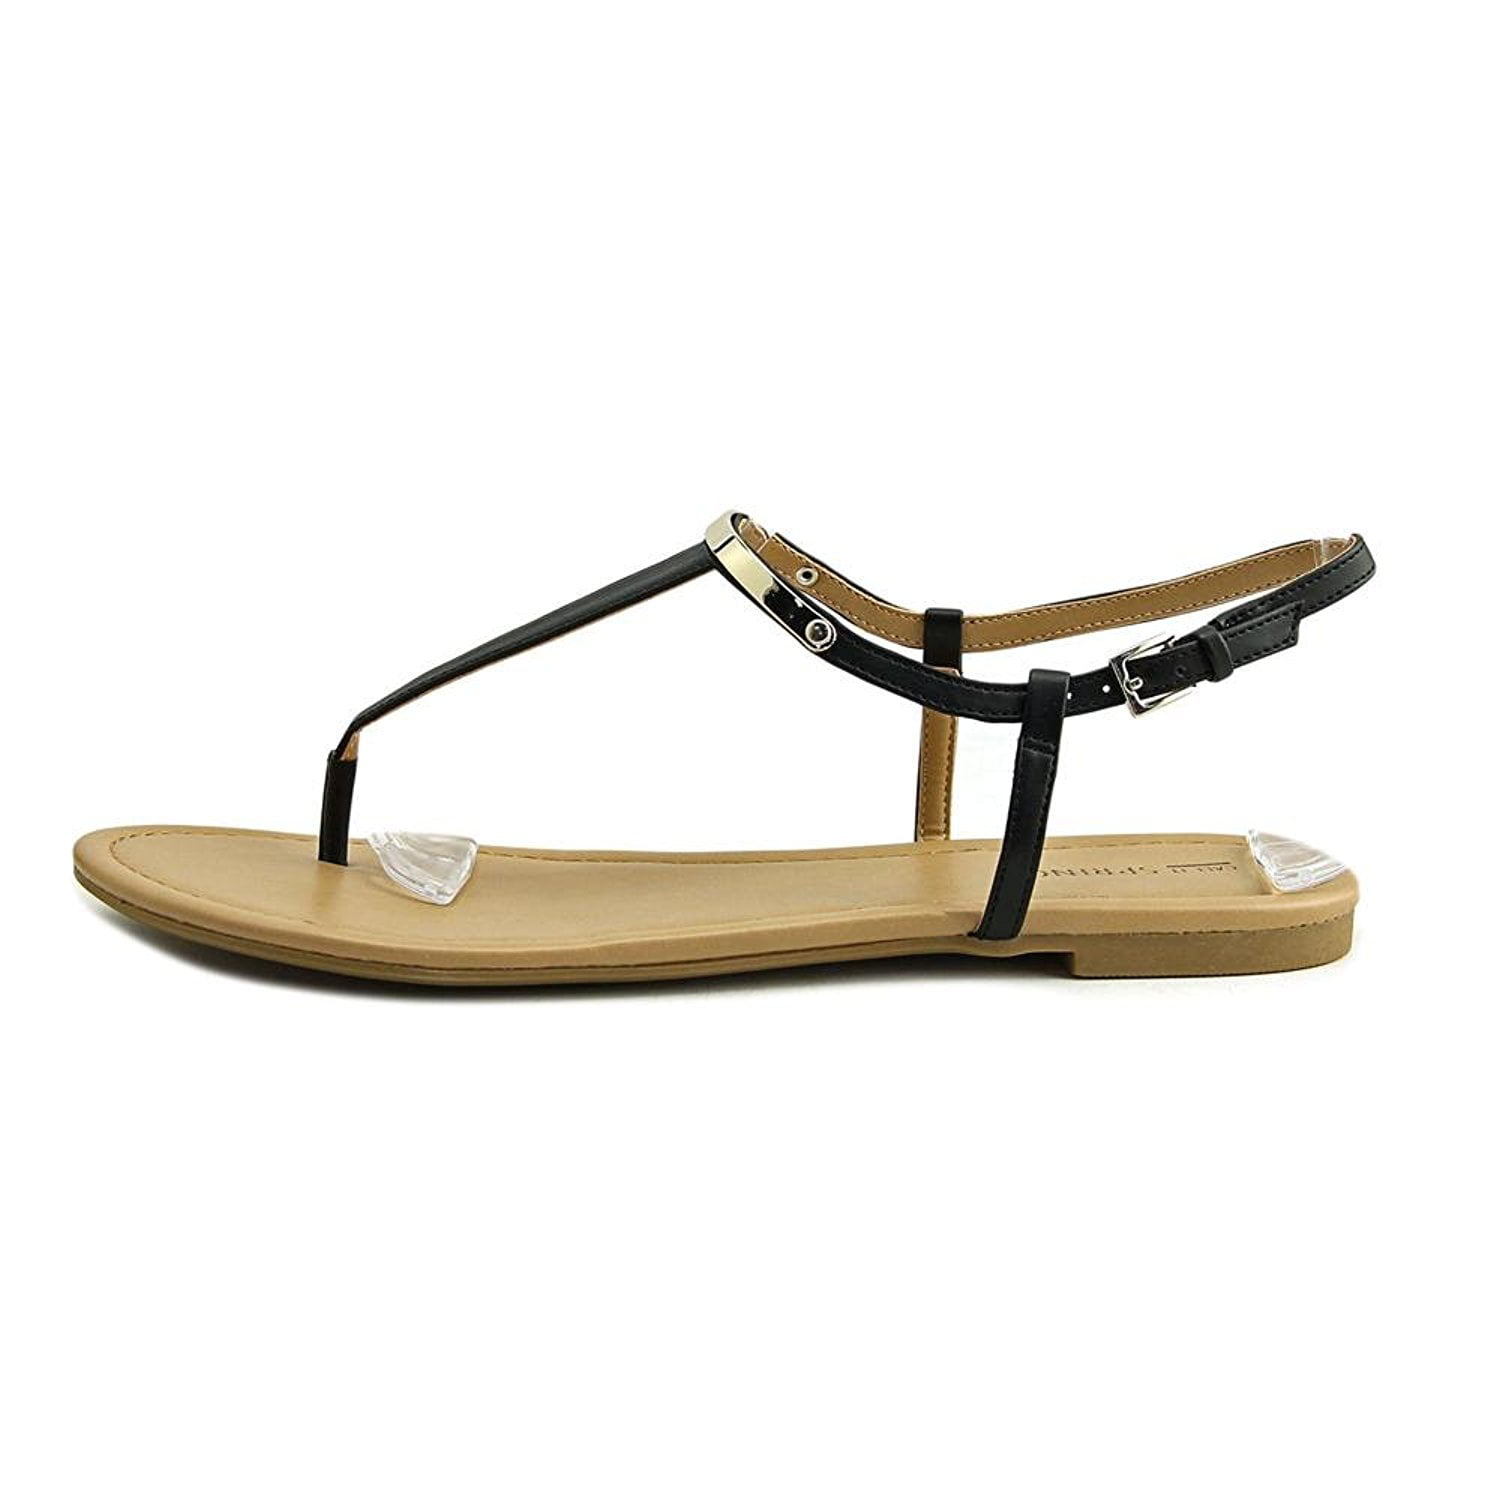 Call It Spring - Call It Spring Womens Aareniel Open Toe Casual T-Strap ...